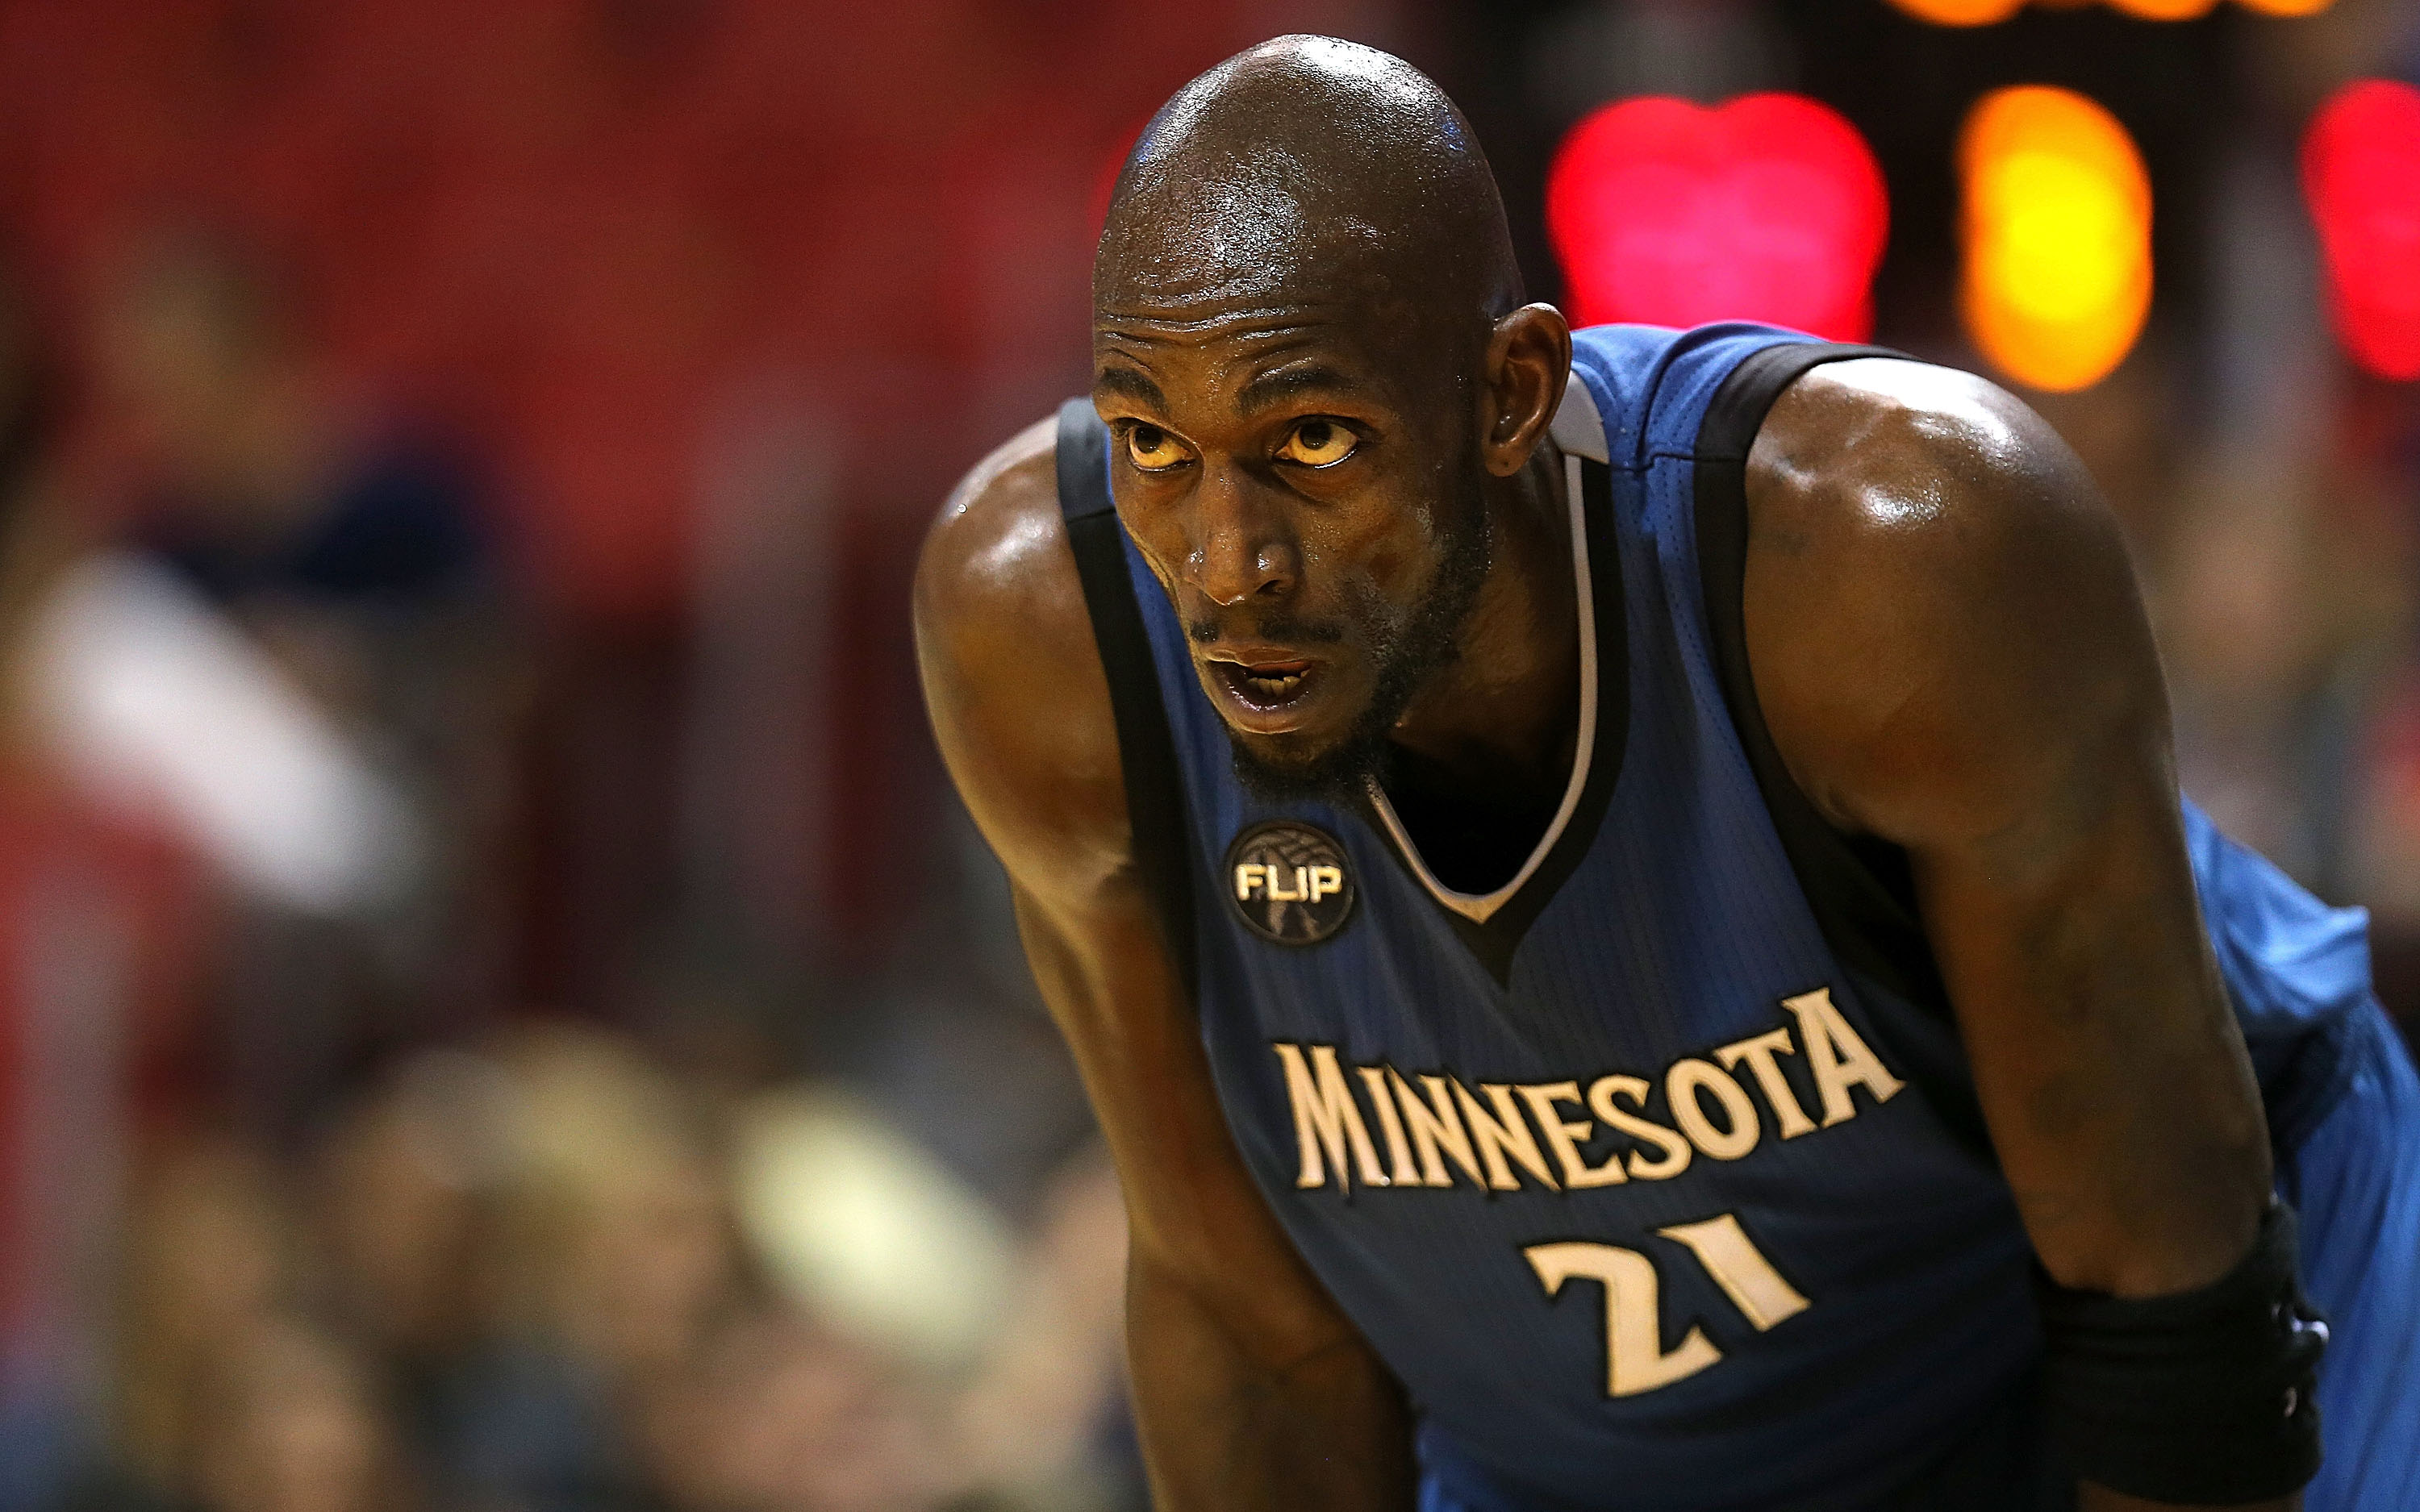 Marc And Daniel Levin Call Kevin Garnett’s Jump From High School To NBA ‘A Spontaneous Phenomena Of Twisted Fate’